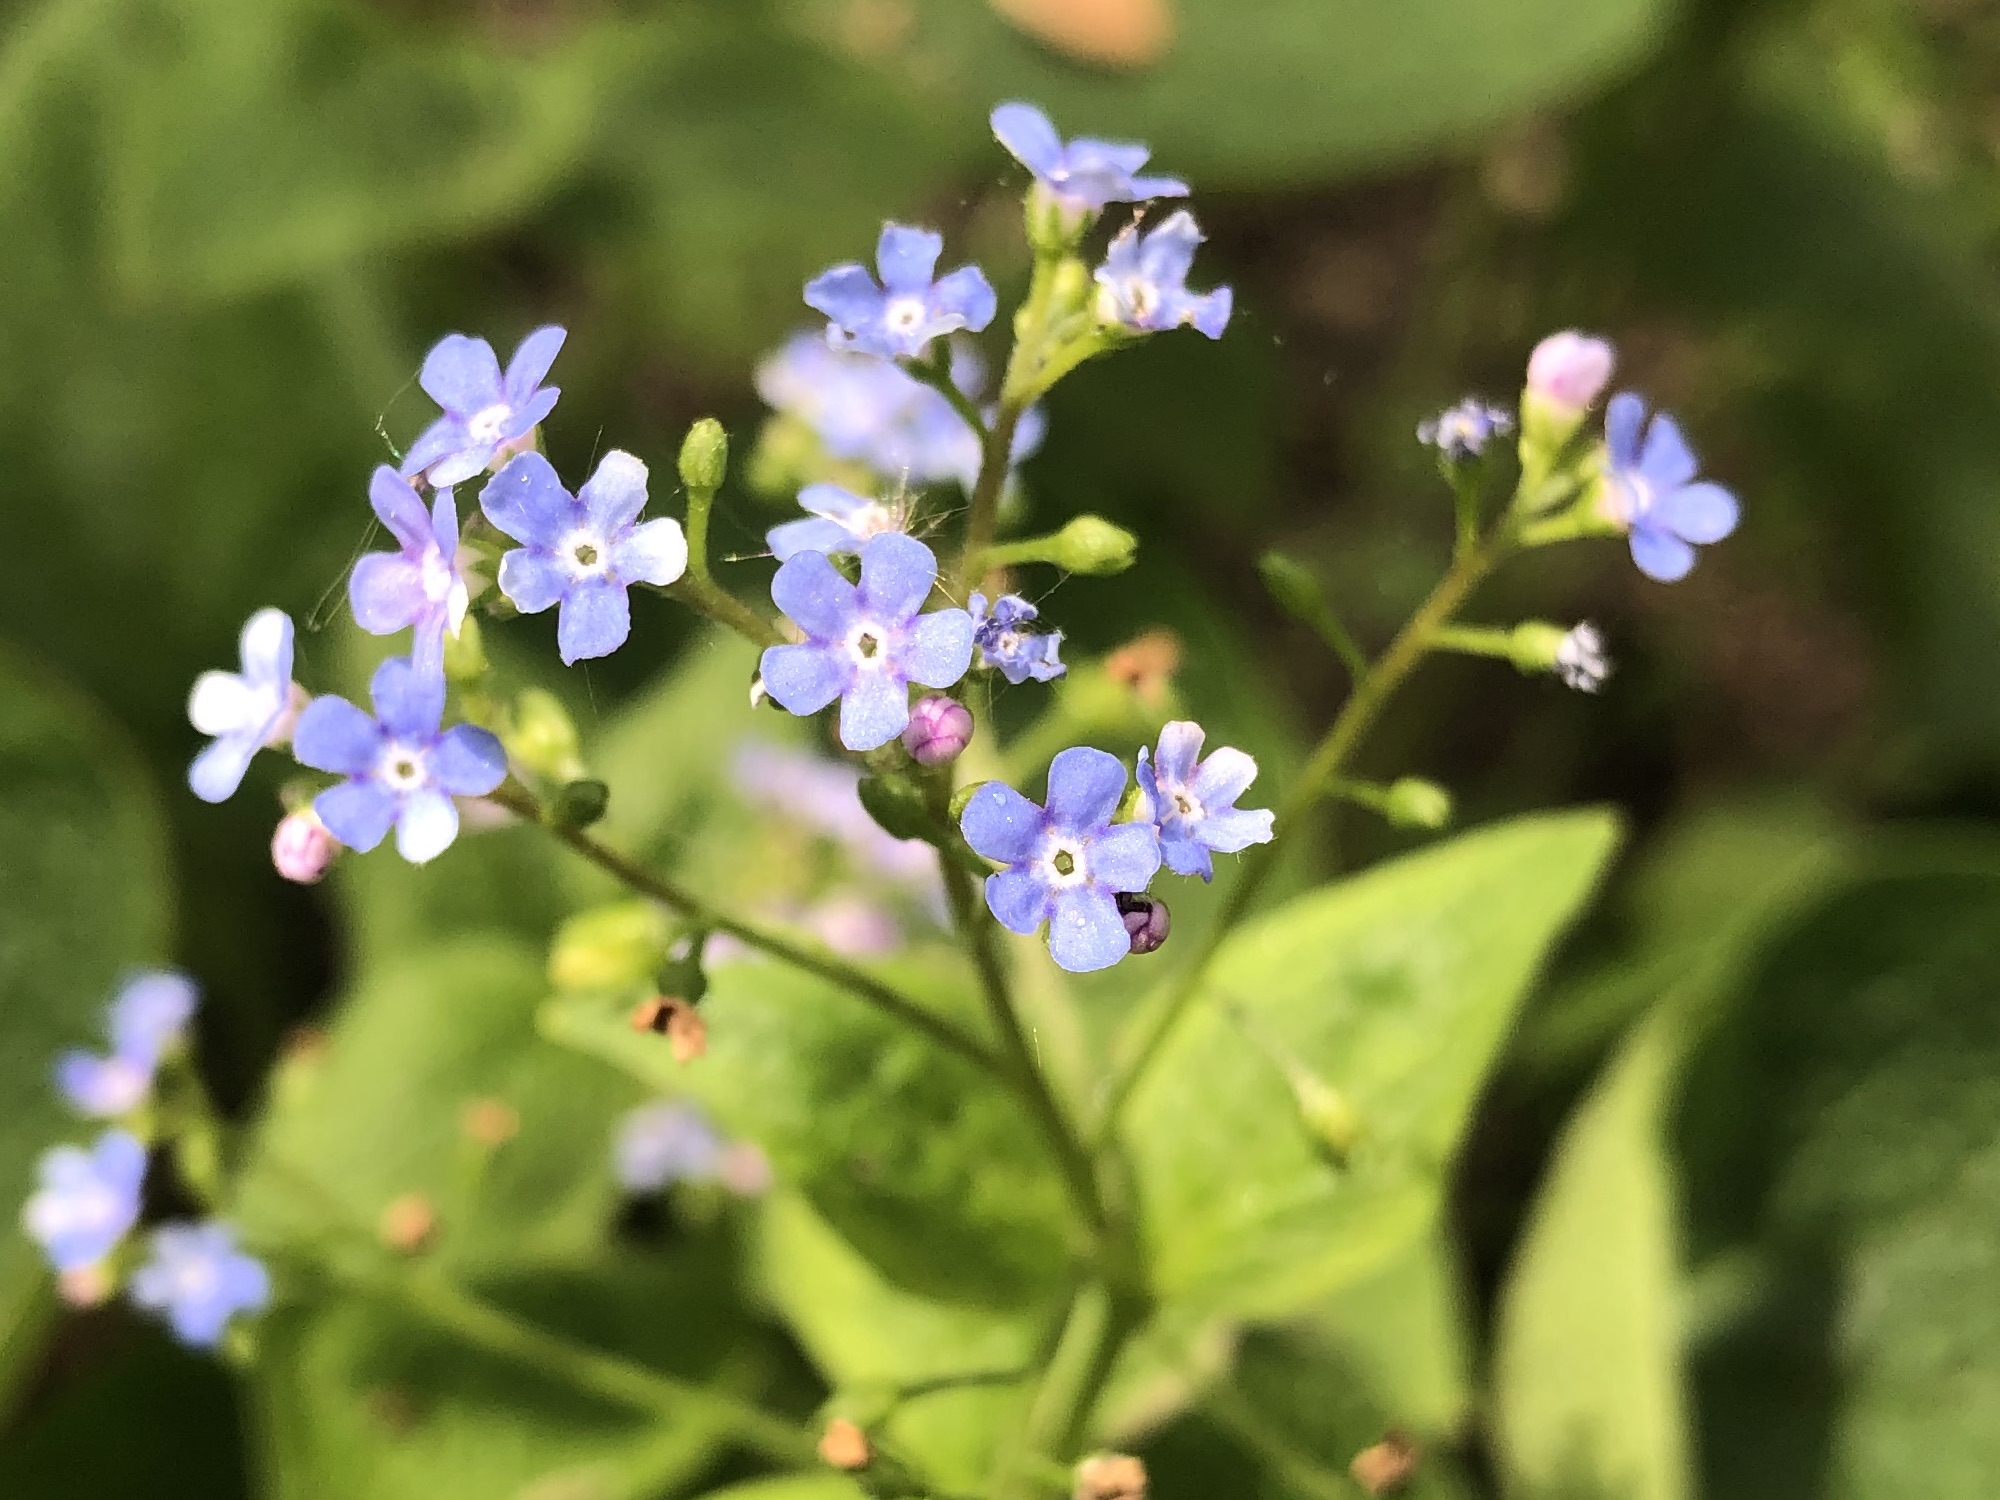 False Forget-Me-Not near Agawa in Madison, Wisconsin on May 23, 2022.